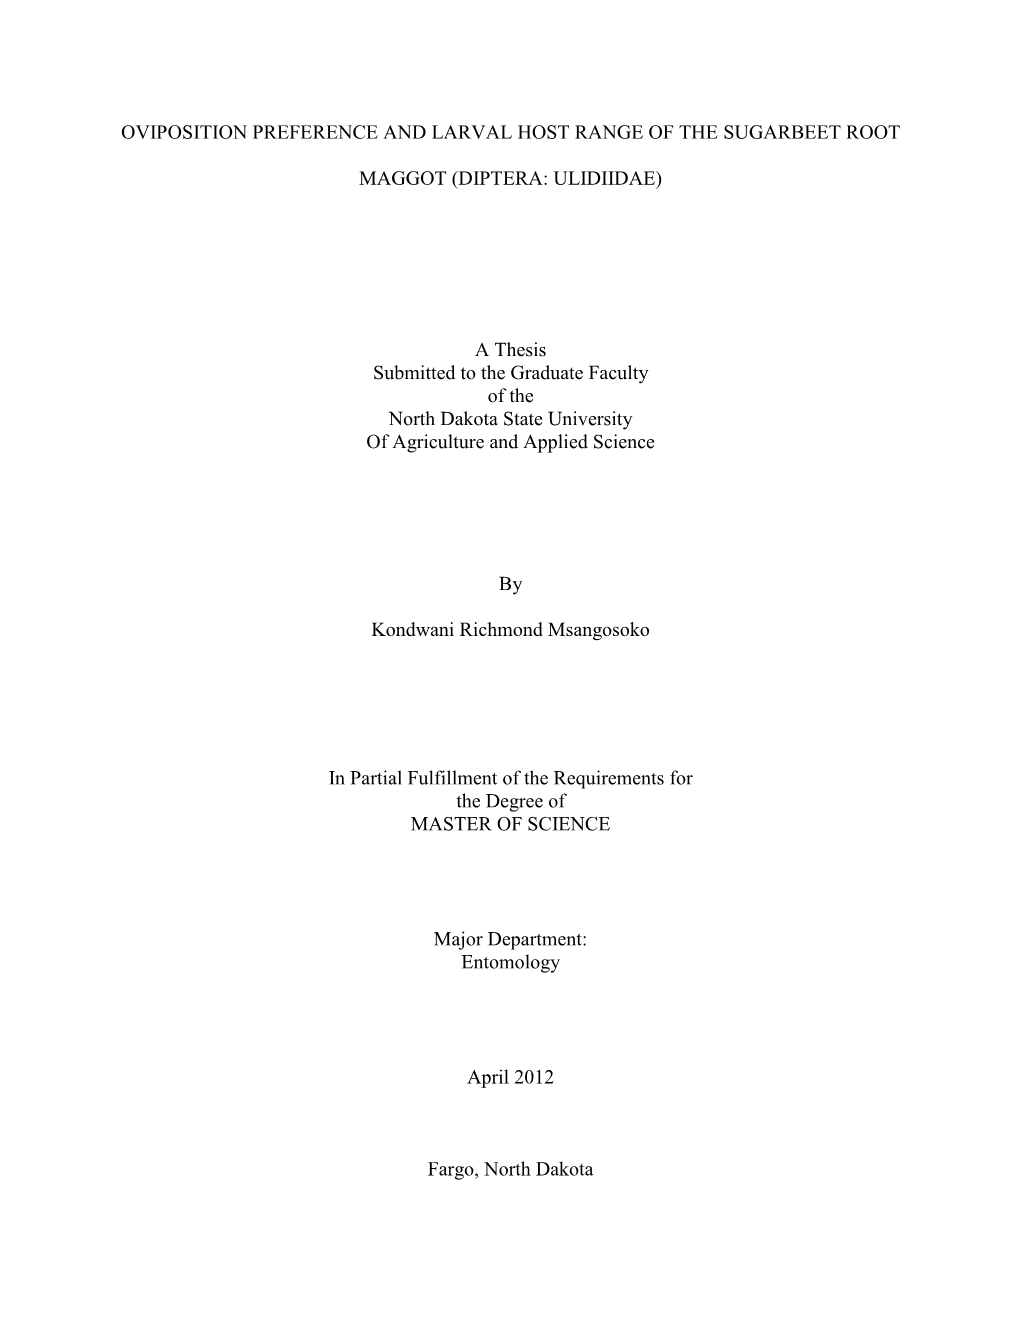 OVIPOSITION PREFERENCE and LARVAL HOST RANGE of the SUGARBEET ROOT MAGGOT (DIPTERA: ULIDIIDAE) a Thesis Submitted to the Gradua